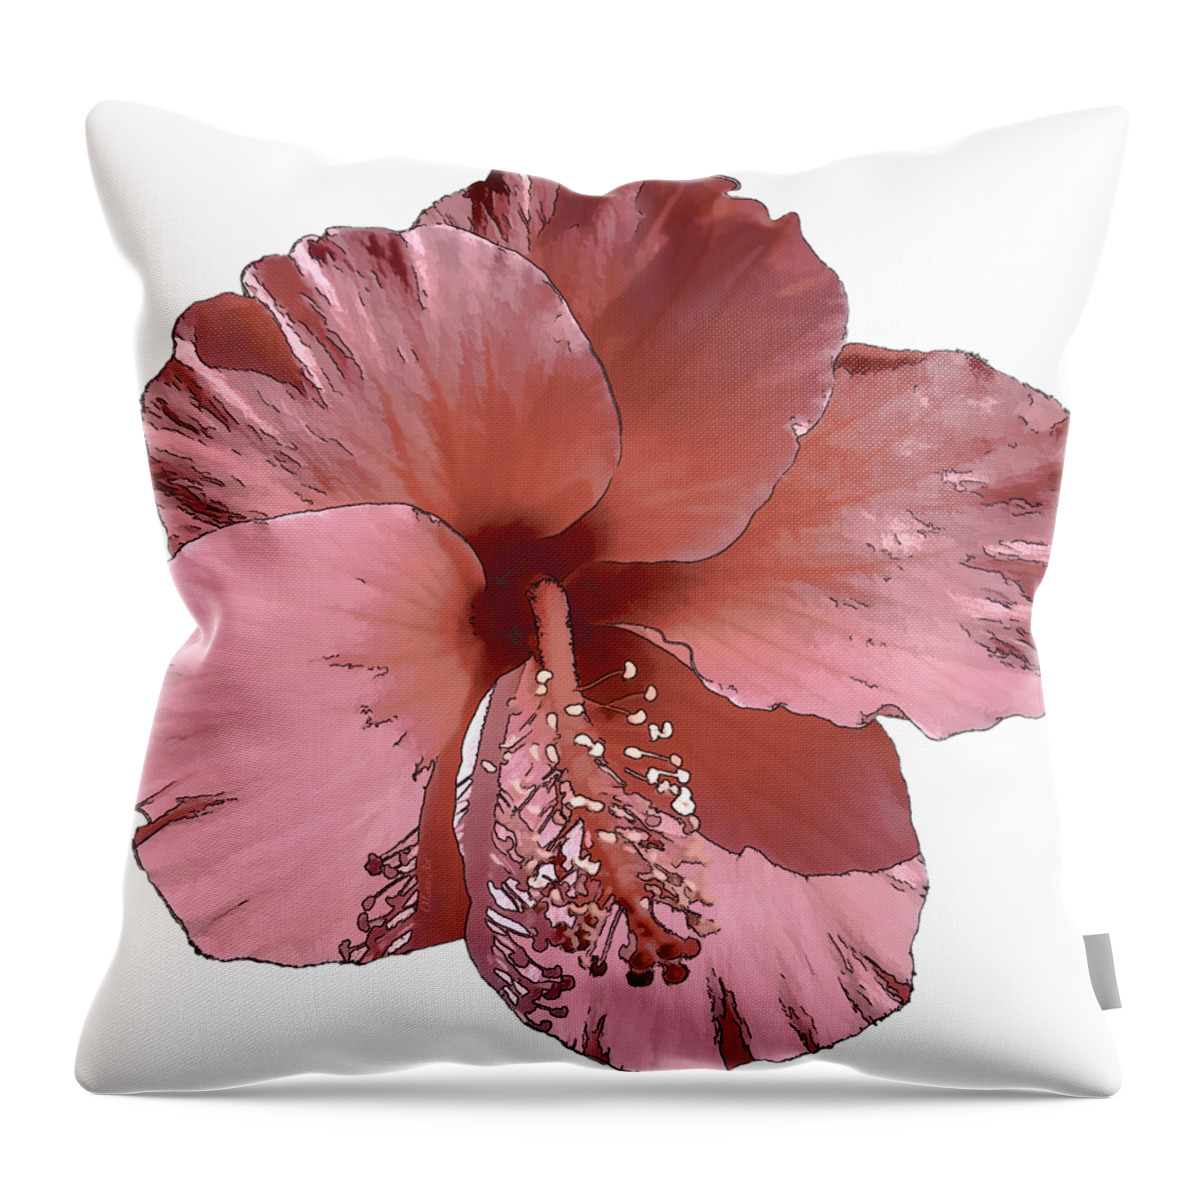  Hibiscus Throw Pillow featuring the digital art Hibiscus Flower by OLena Art